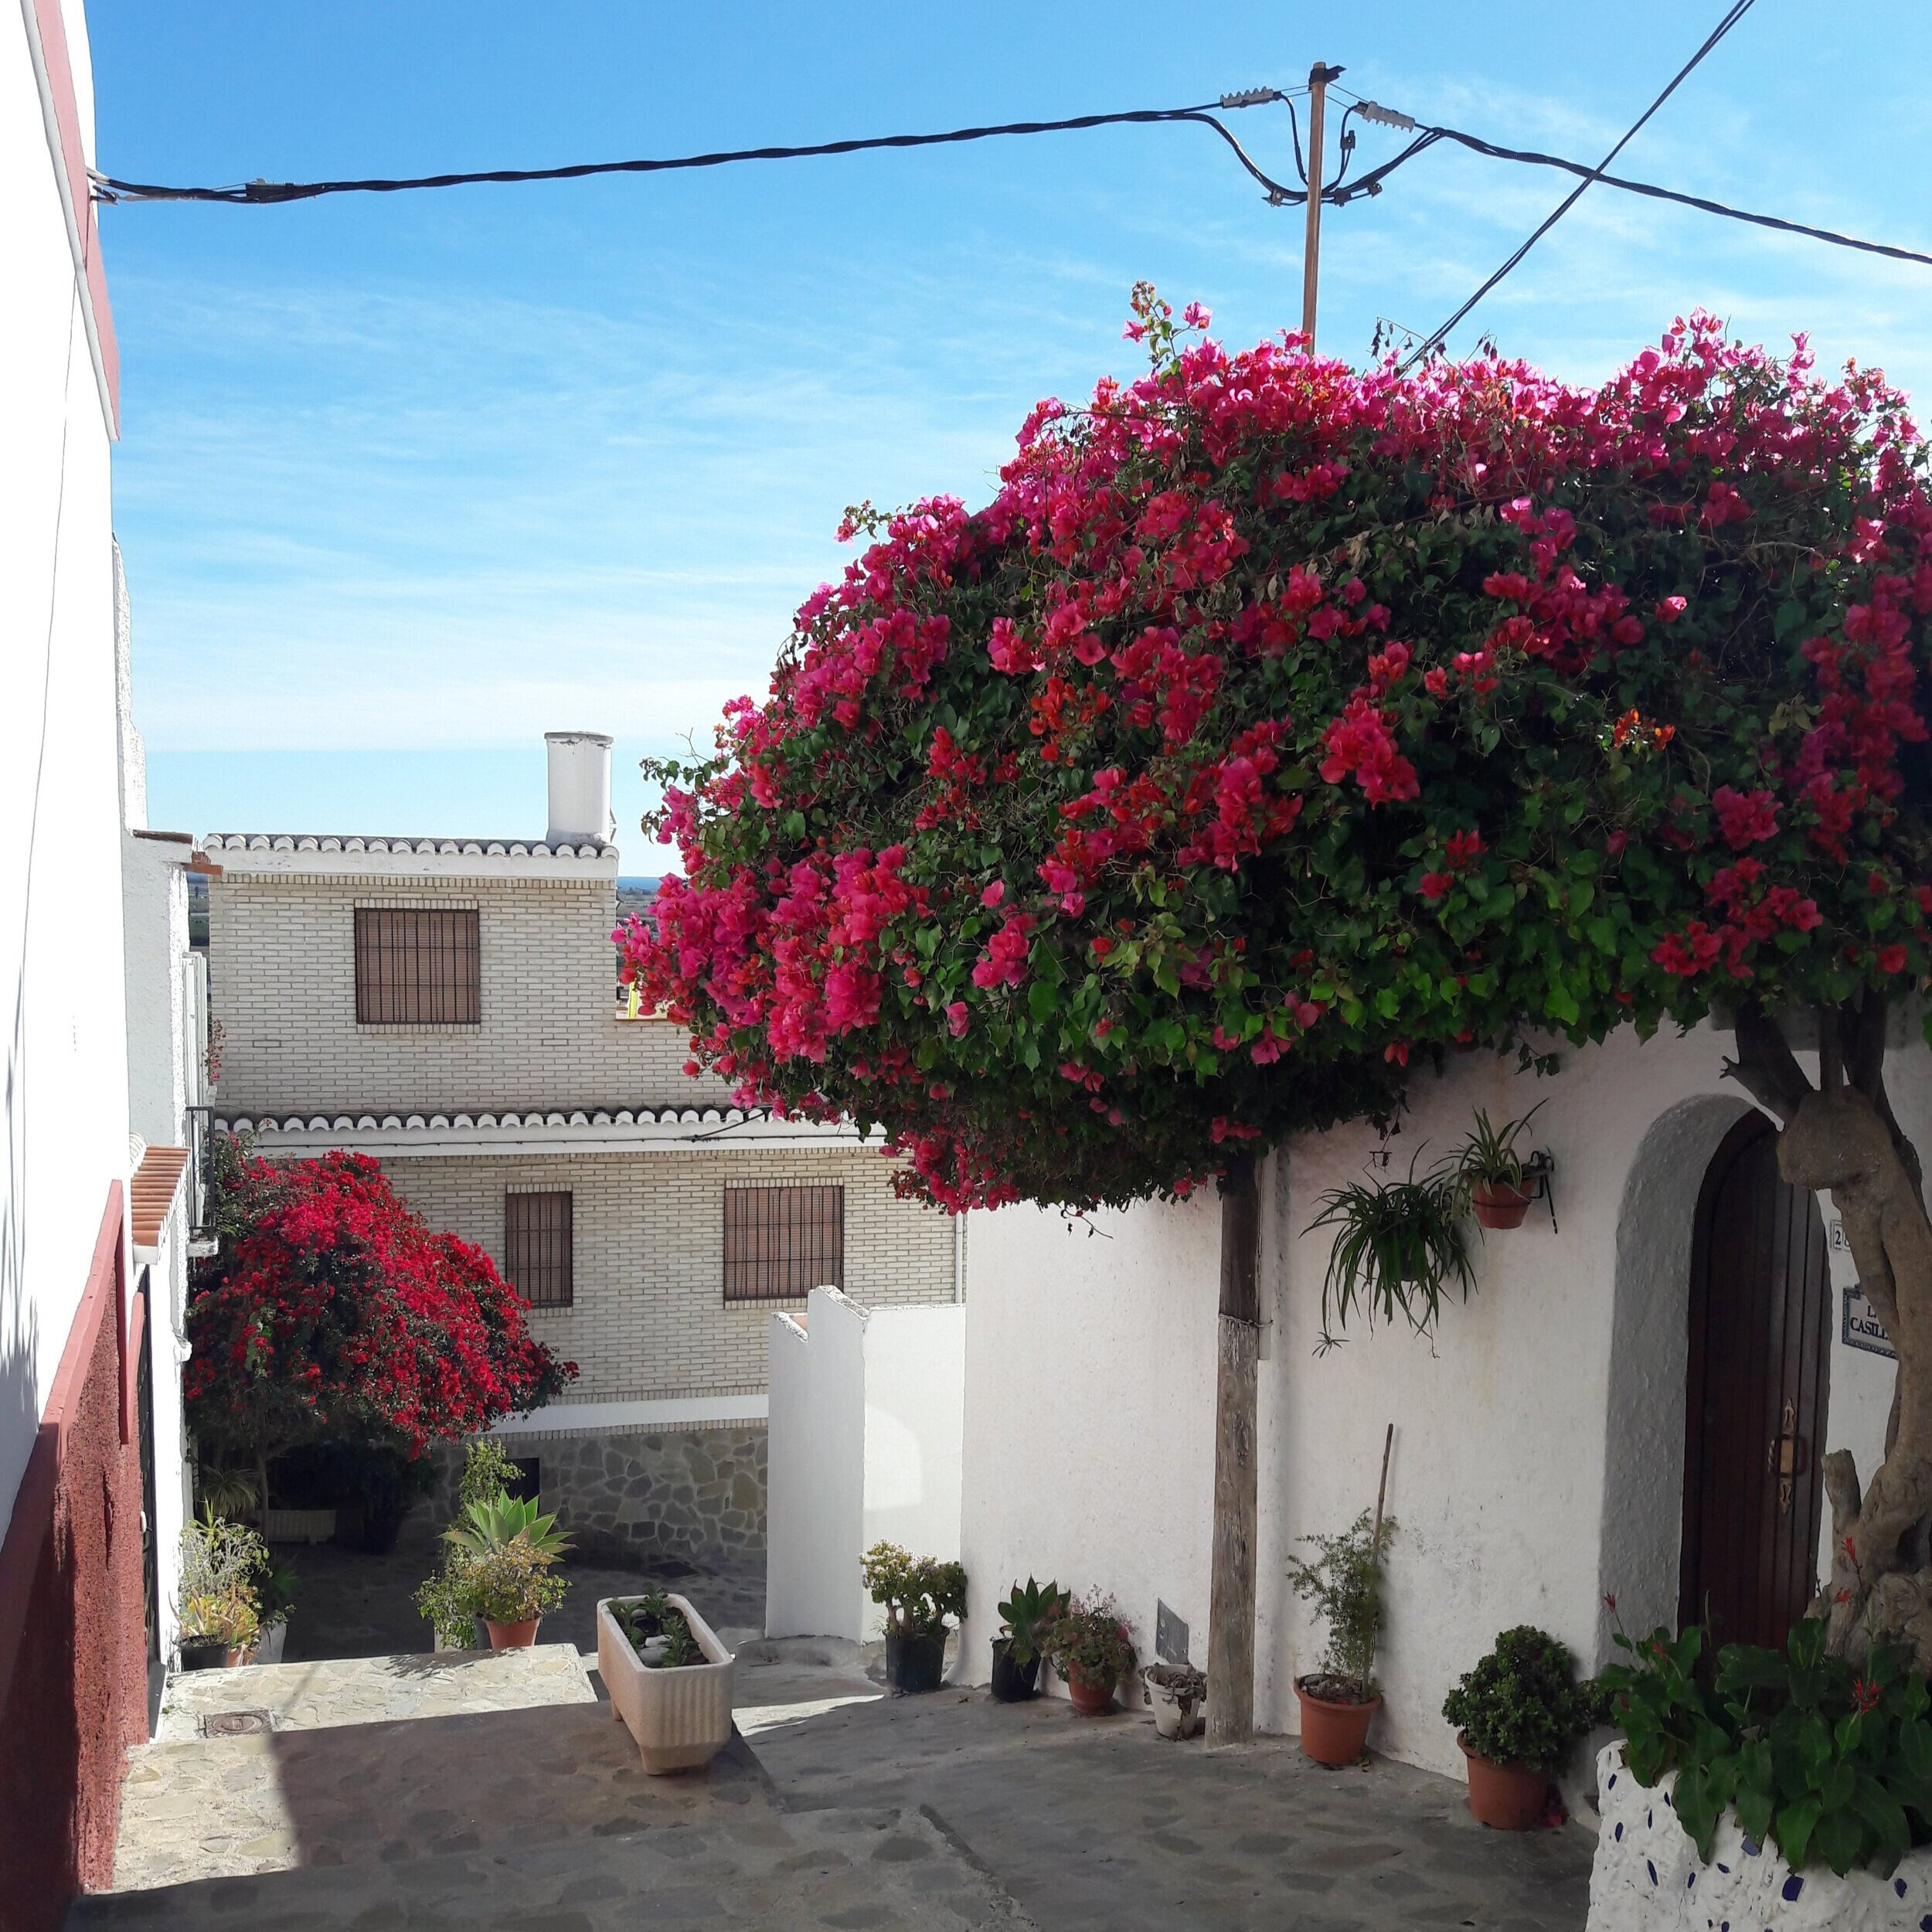 Most visit Salobreña for the beach, but its town is beautiful, too!